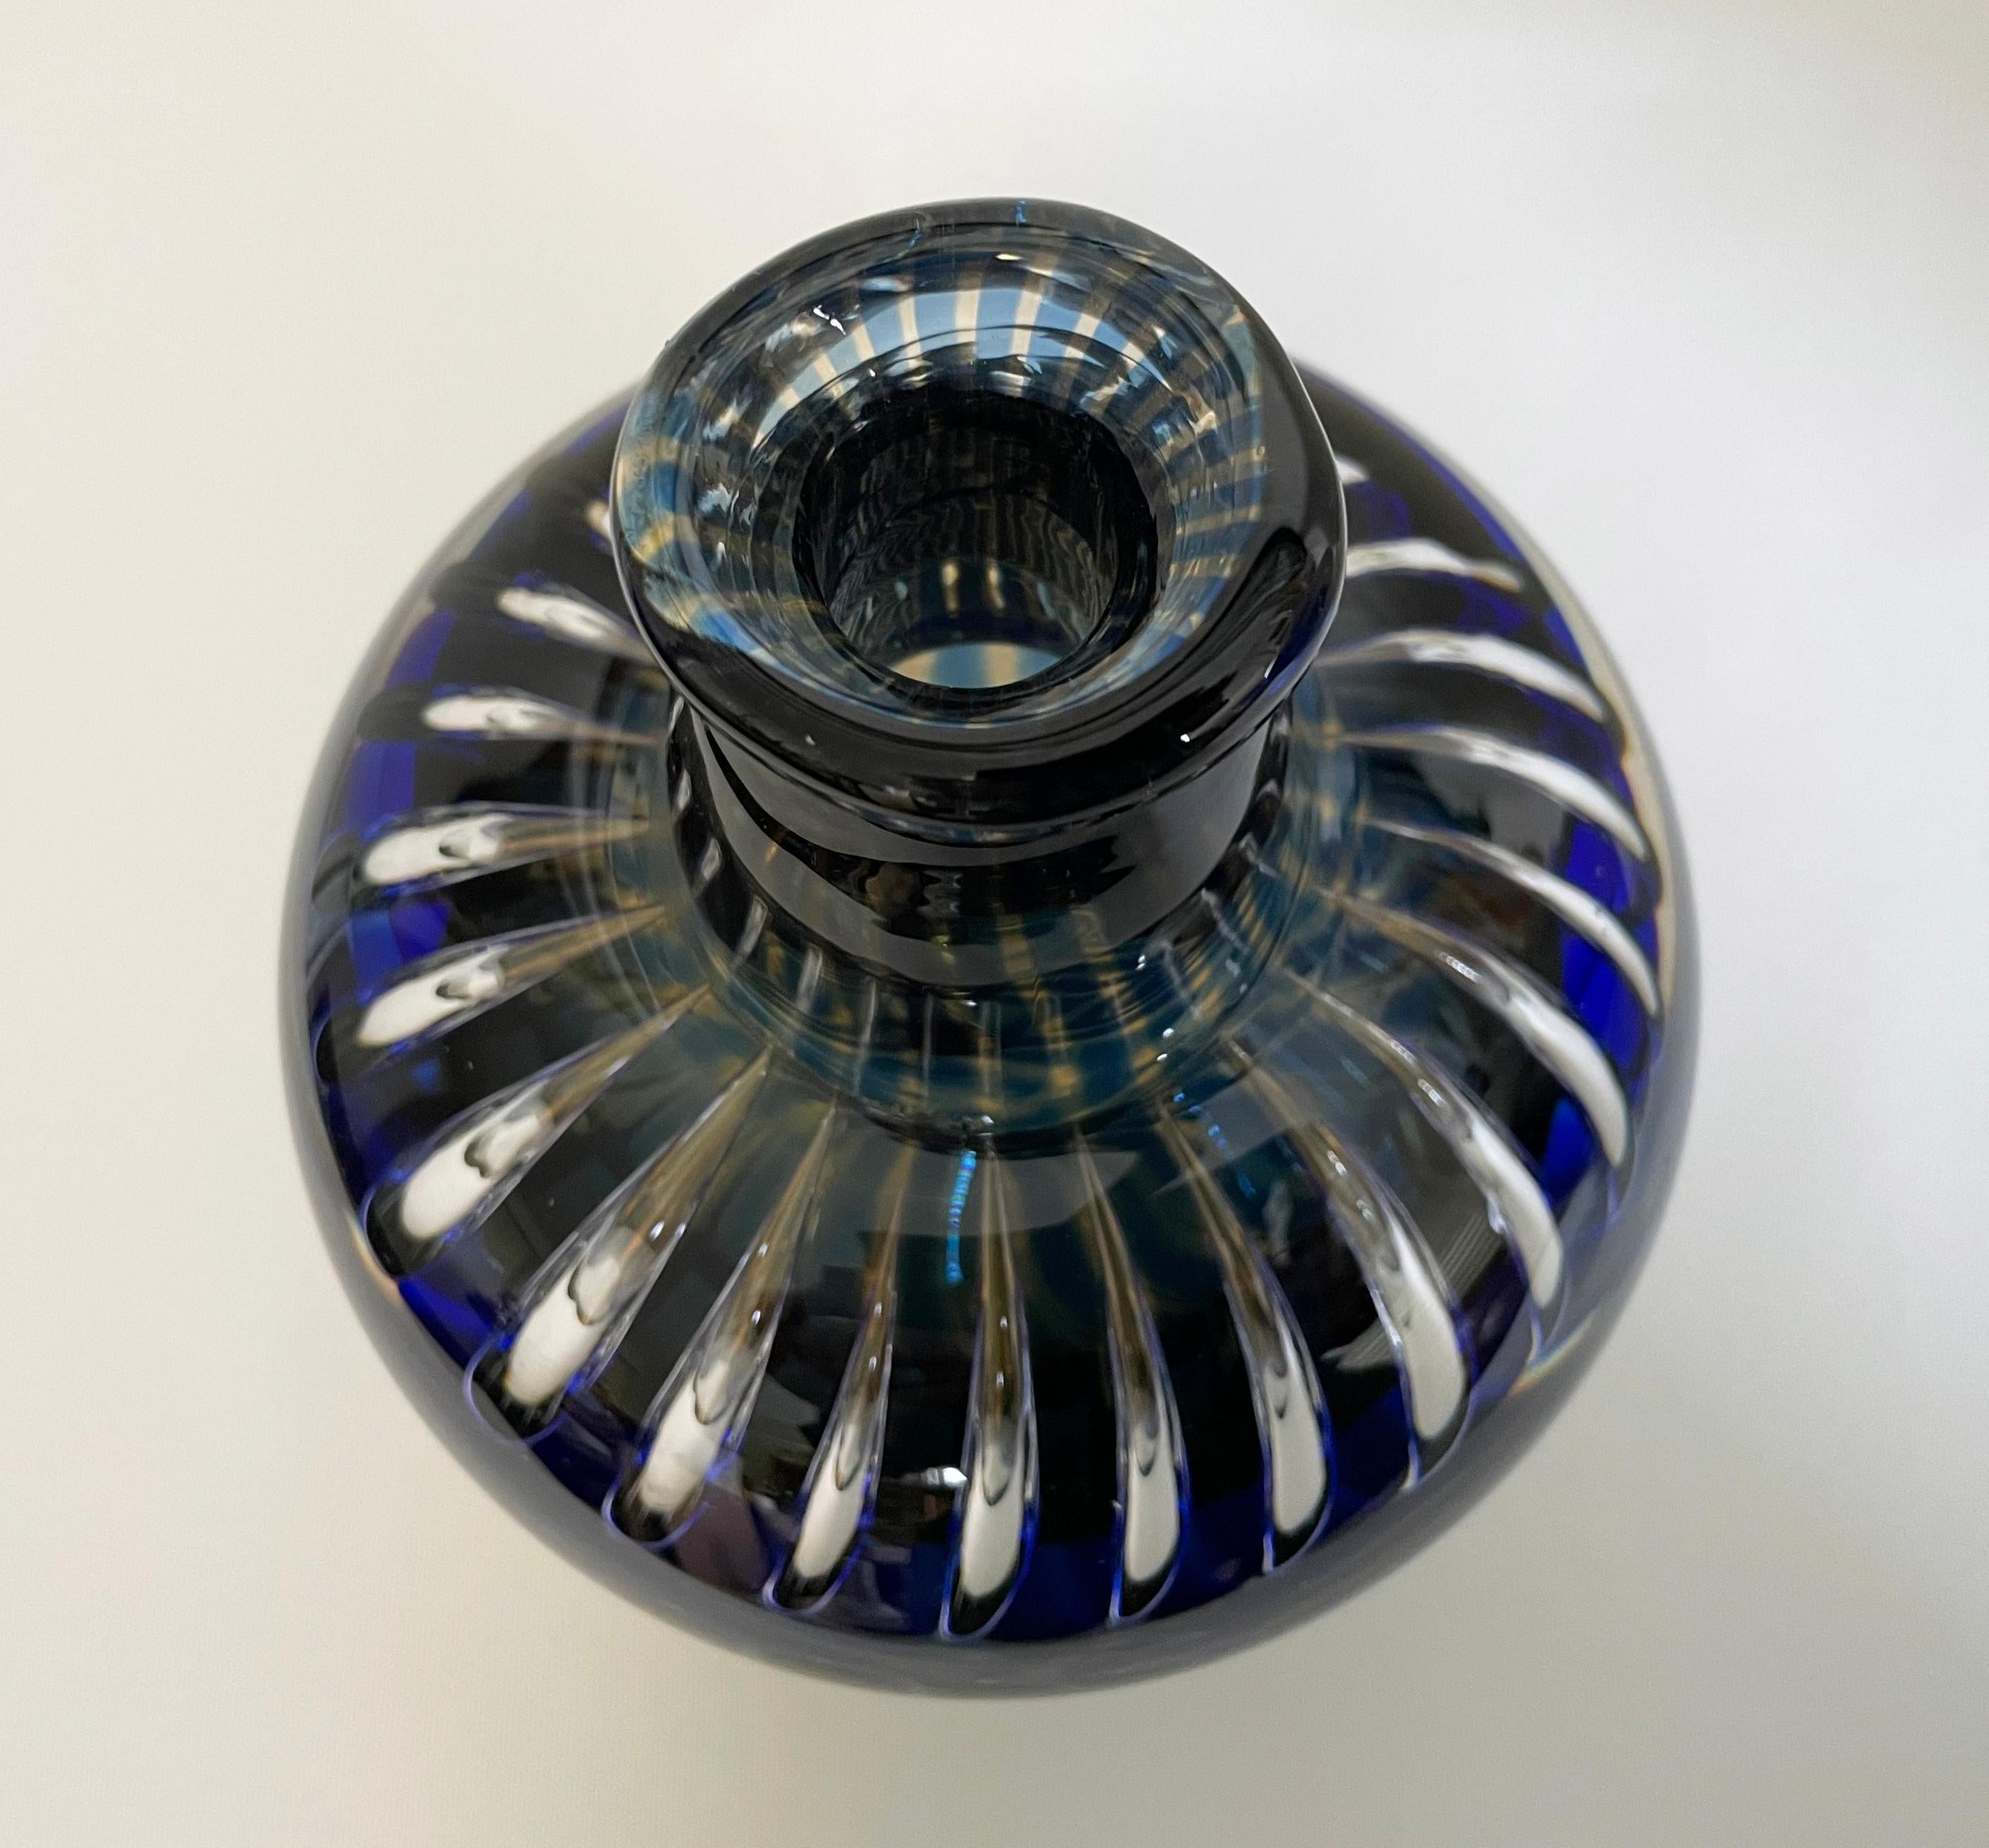 Orrefors Ariel Vase By Edvin Ohrstrom, Circa 1950 In Excellent Condition For Sale In Melbourne, Victoria